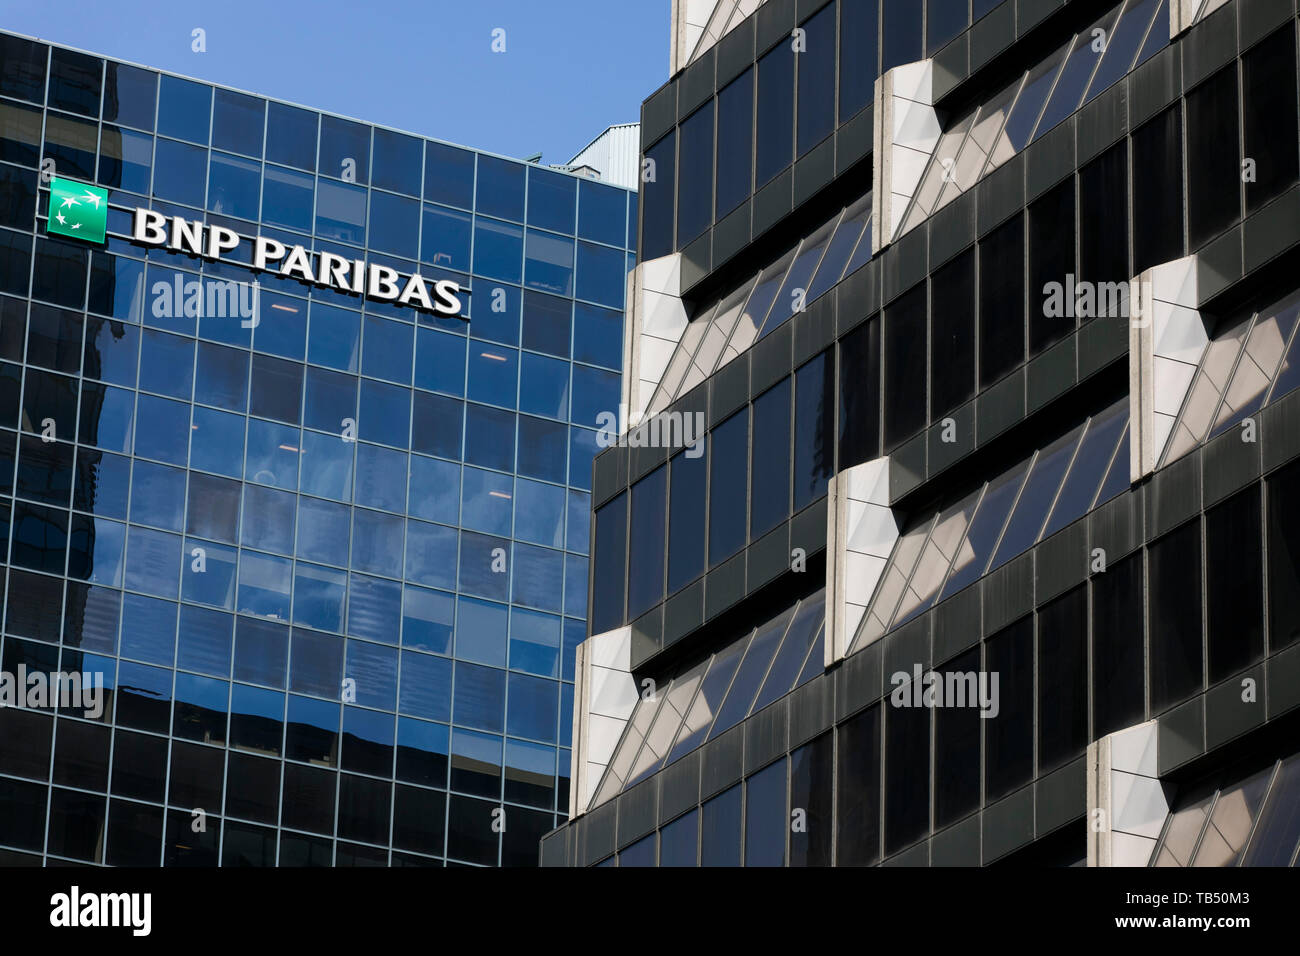 A logo sign outside of a facility occupied by BNP Paribas in Montreal, Quebec, Canada, on April 21, 2019. Stock Photo